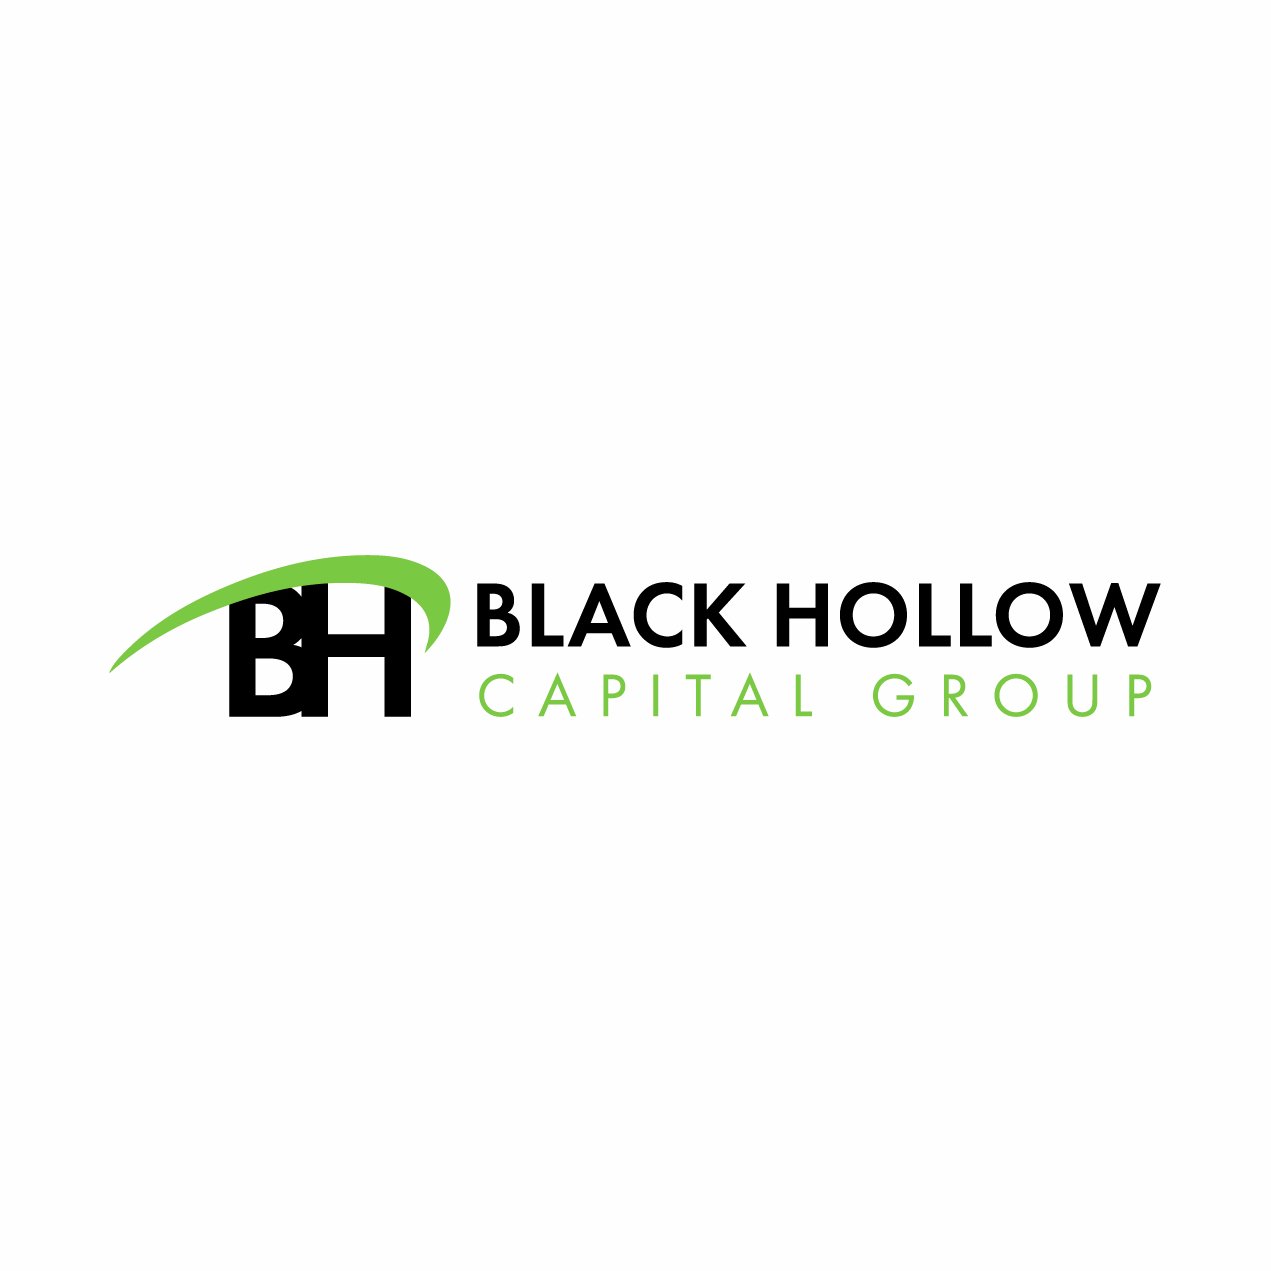 Black Hollow Capital Group is a private entrepreneurial investment firm located just outside of Calgary, Alberta Canada that specializes in acquiring  business